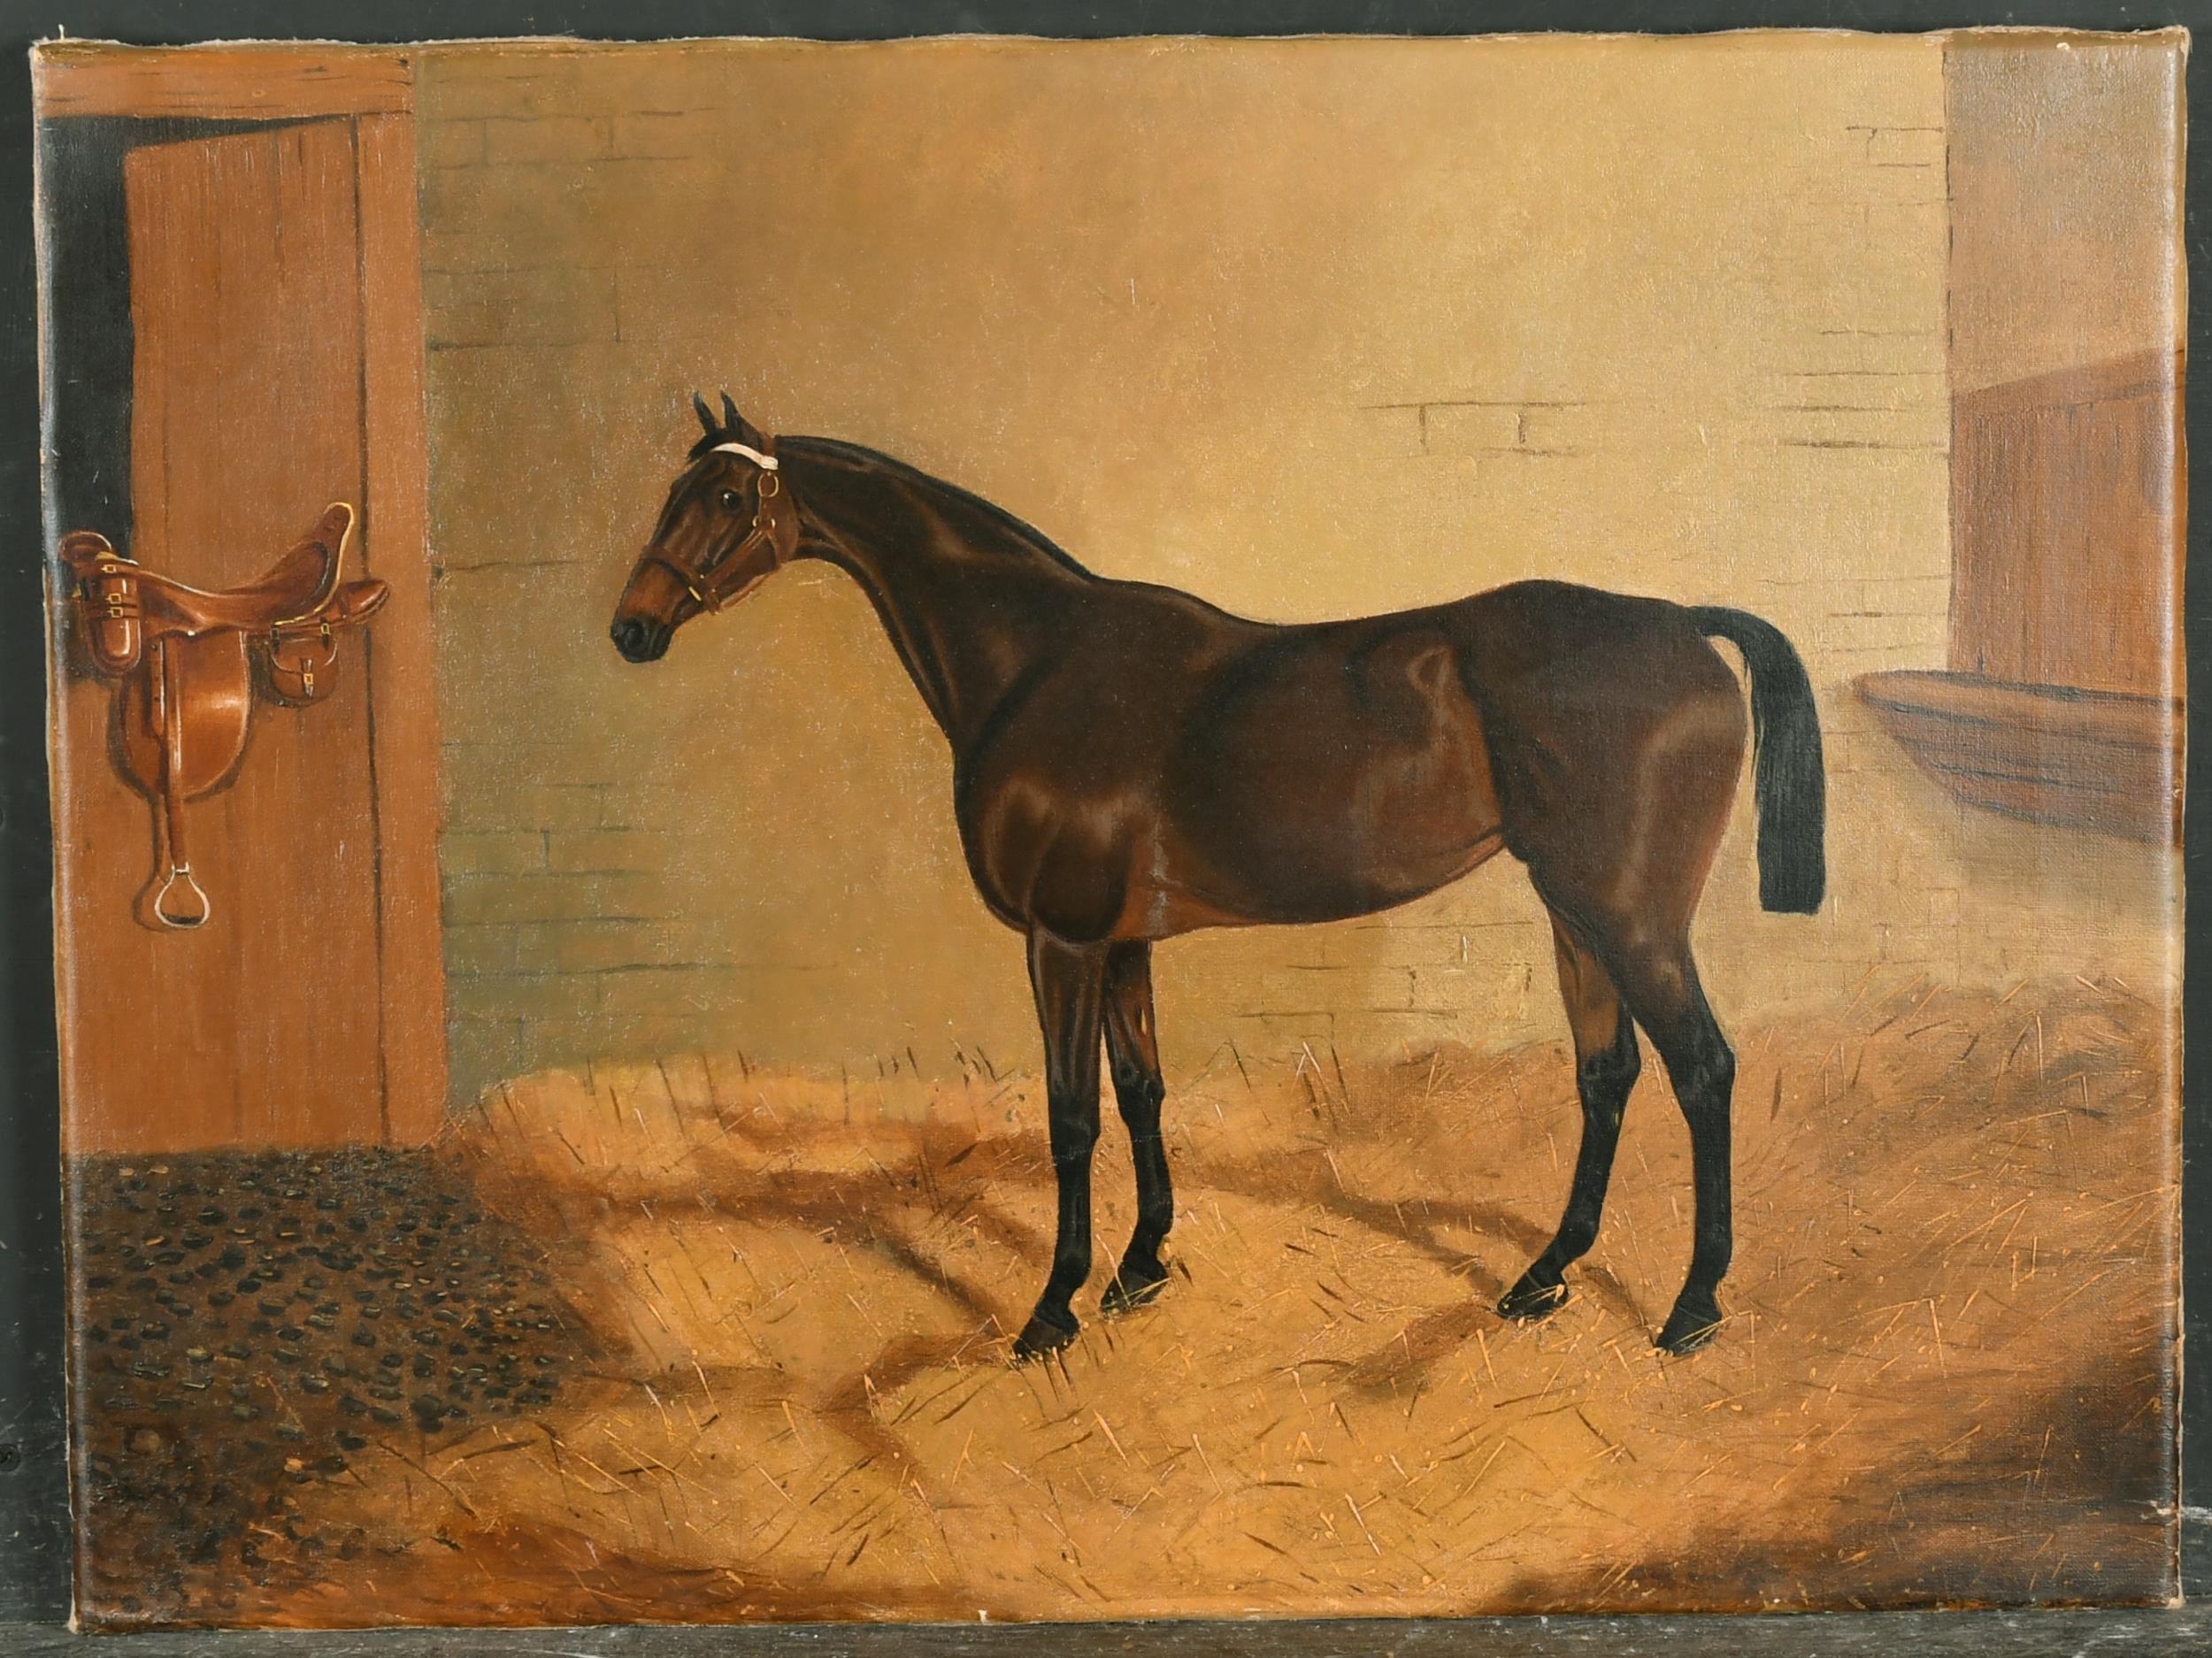 Fine Antique British Sporting Art Oil Painting, A Hunter in Stable Interior - Brown Animal Painting by Colin Graeme Roe